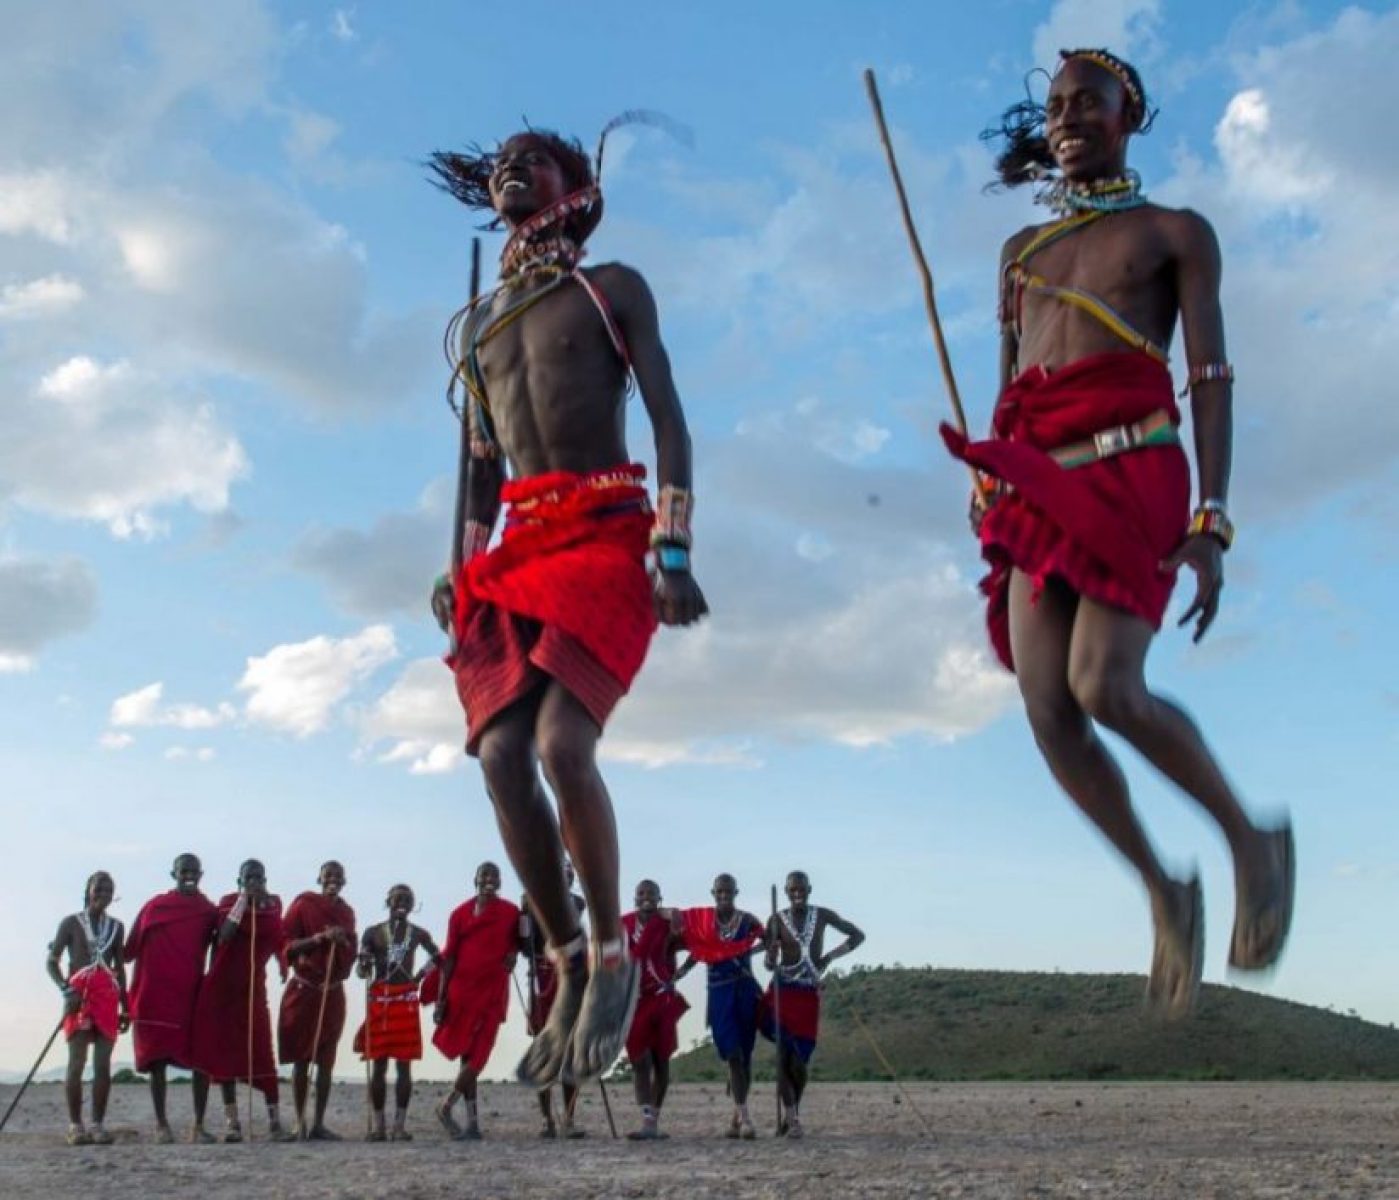 The Art of Movement: African Artists and Dance | © David Yarrow